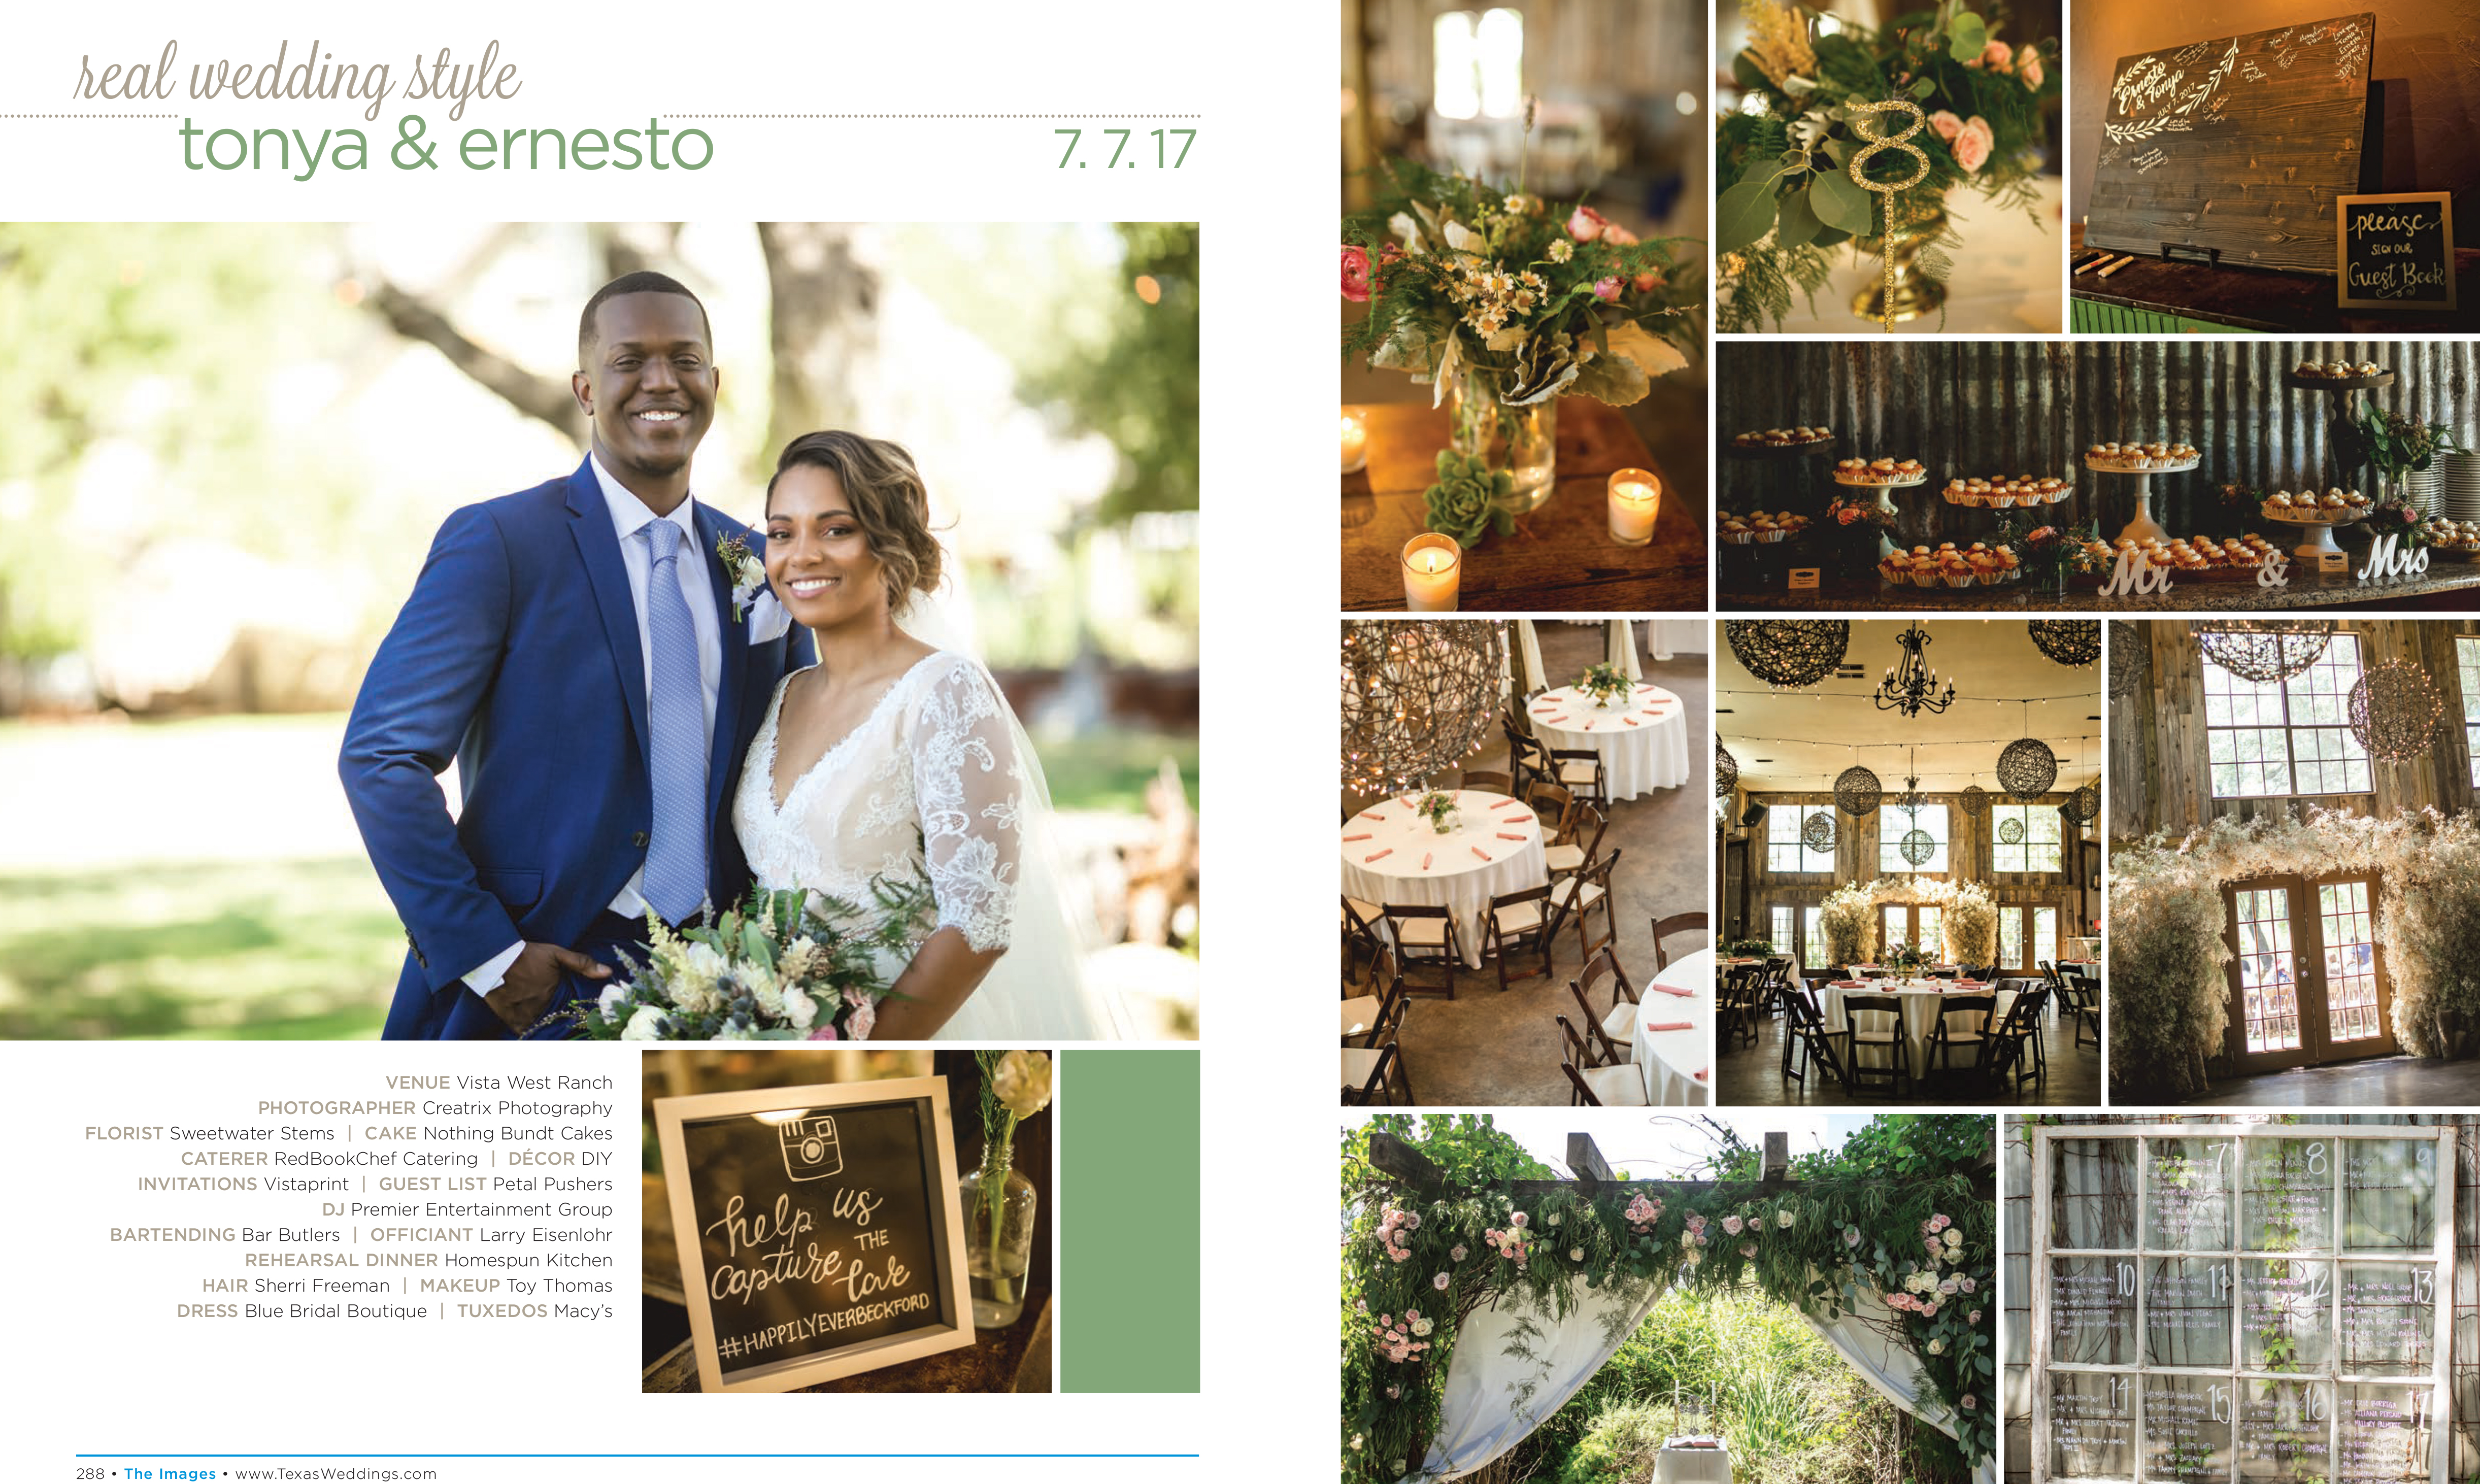 Tonya & Ernesto in their Real Wedding Page in the Fall/Winter 2017 Texas Wedding Guide